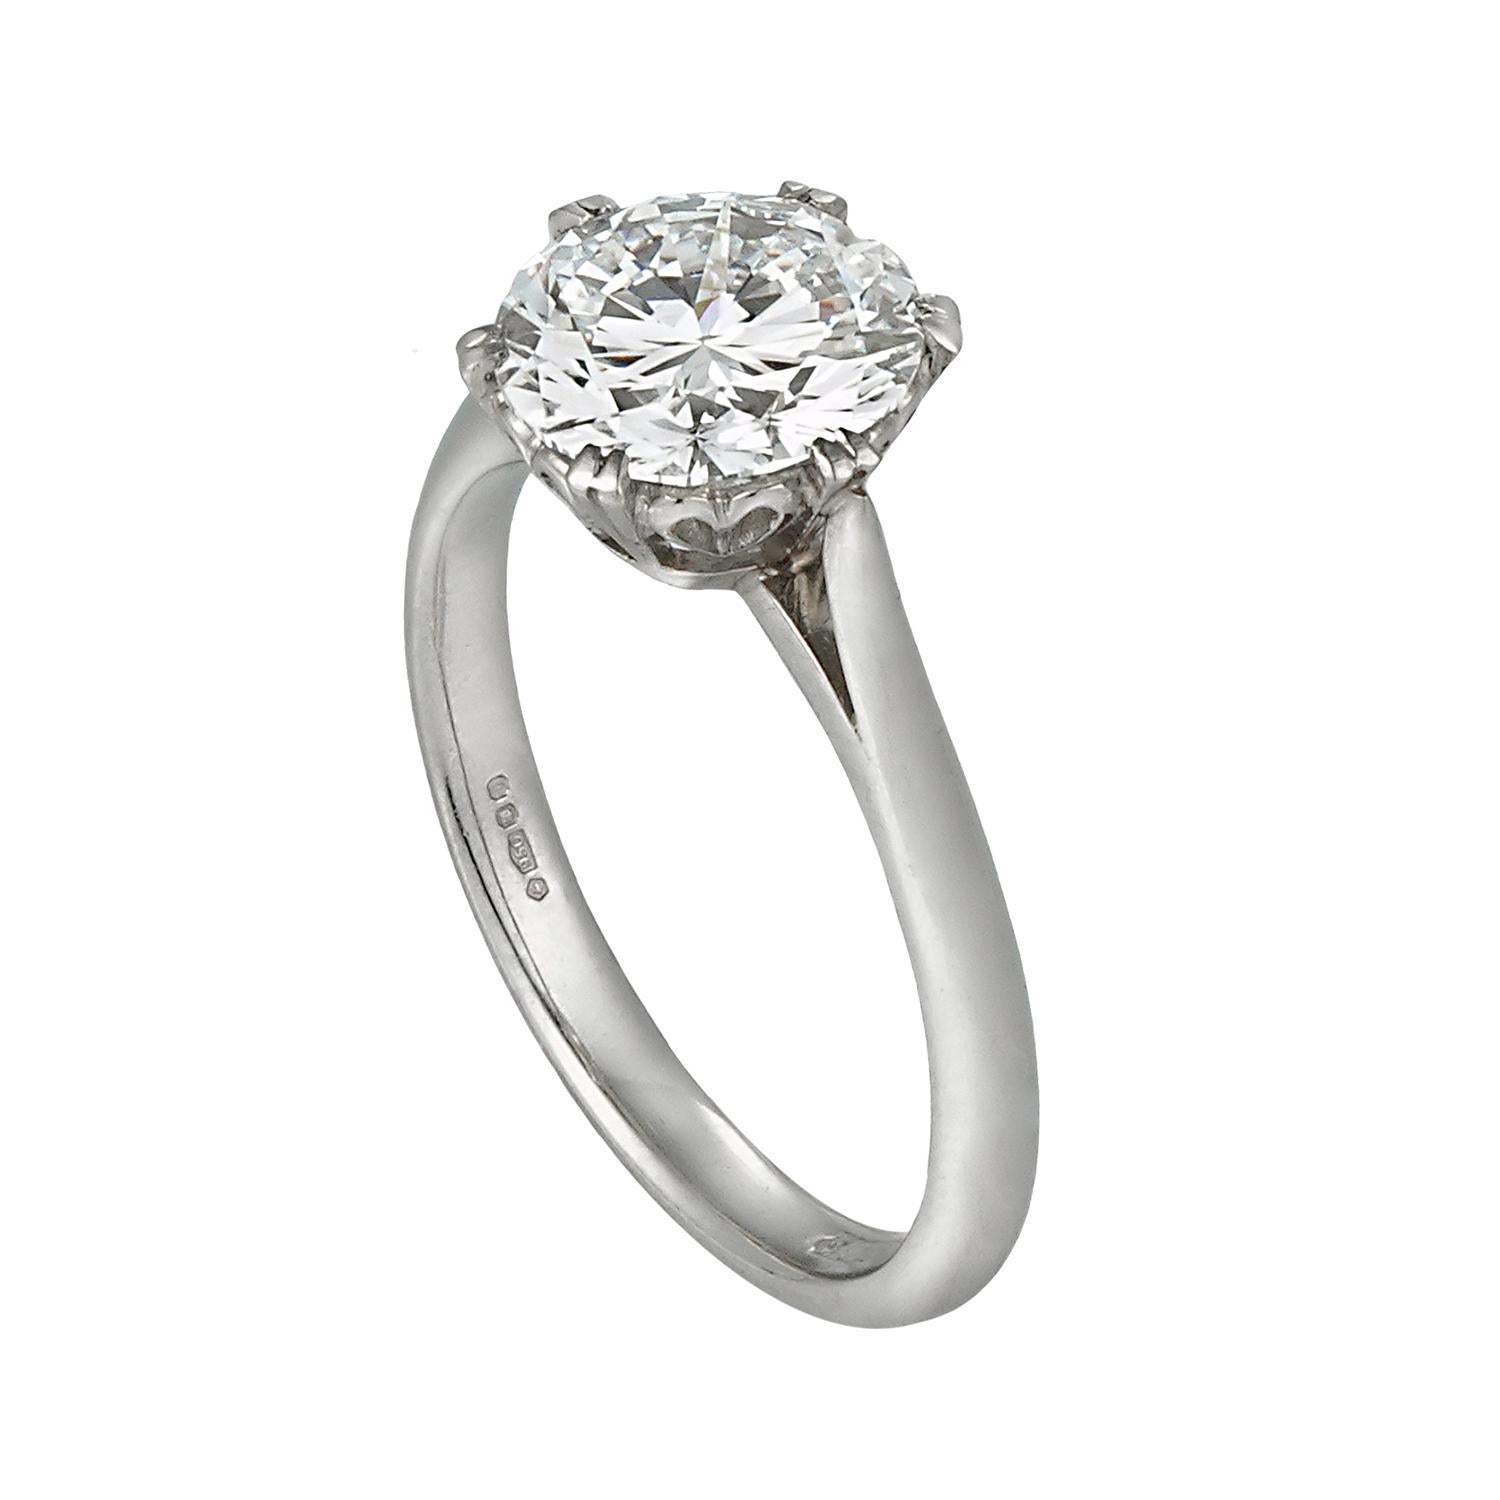 A solitaire diamond ring, the round brilliant cut diamond, weighing 2.05 carats of D colour IF clarity, GIA certificate, six-claw set in a heart shape platinum collet, with tapered D-section shank, hallmarked platinum, London 2010, bearing the